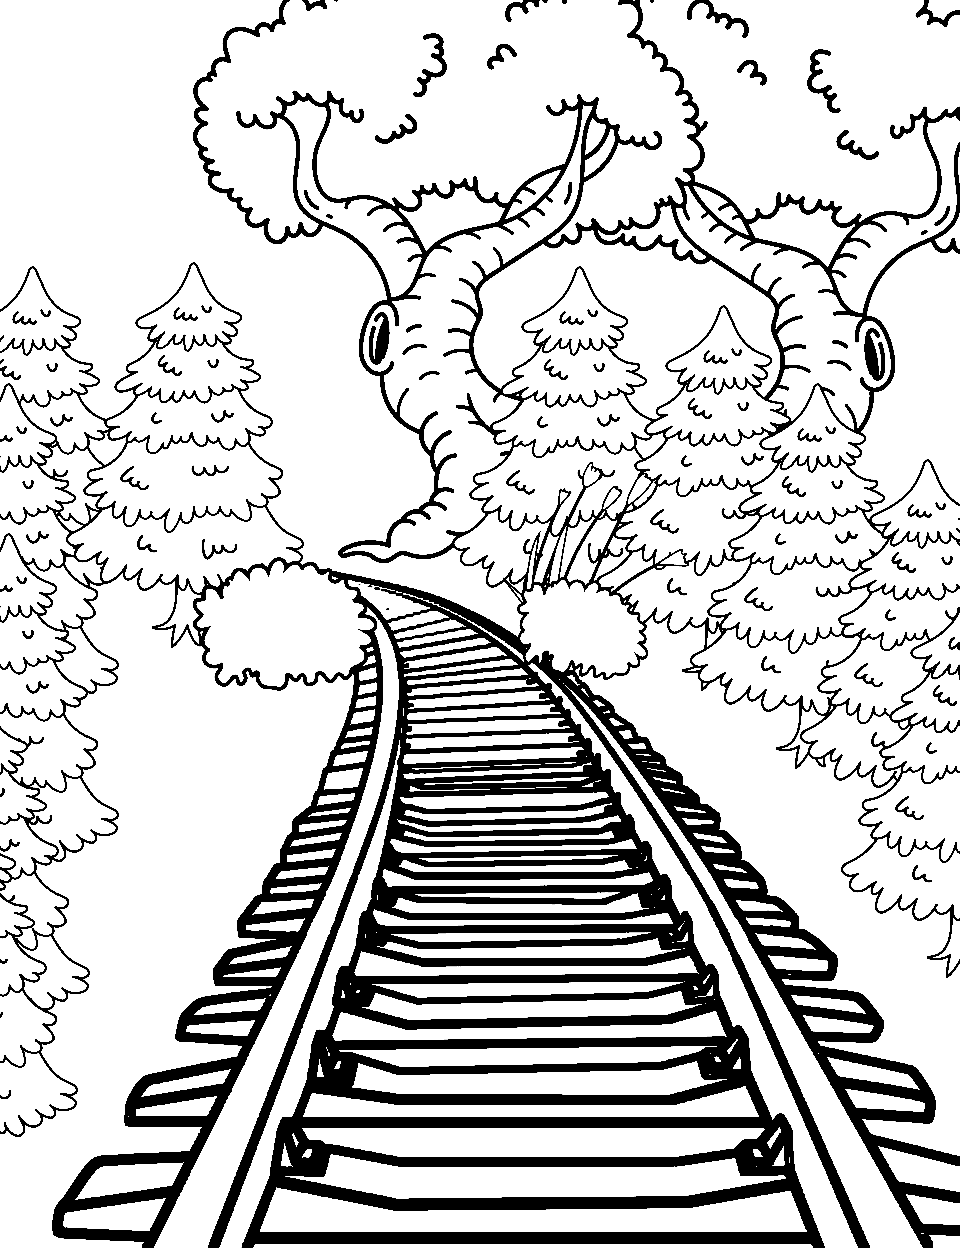 Train Tracks Coloring Page - A detailed train track going through a forest.